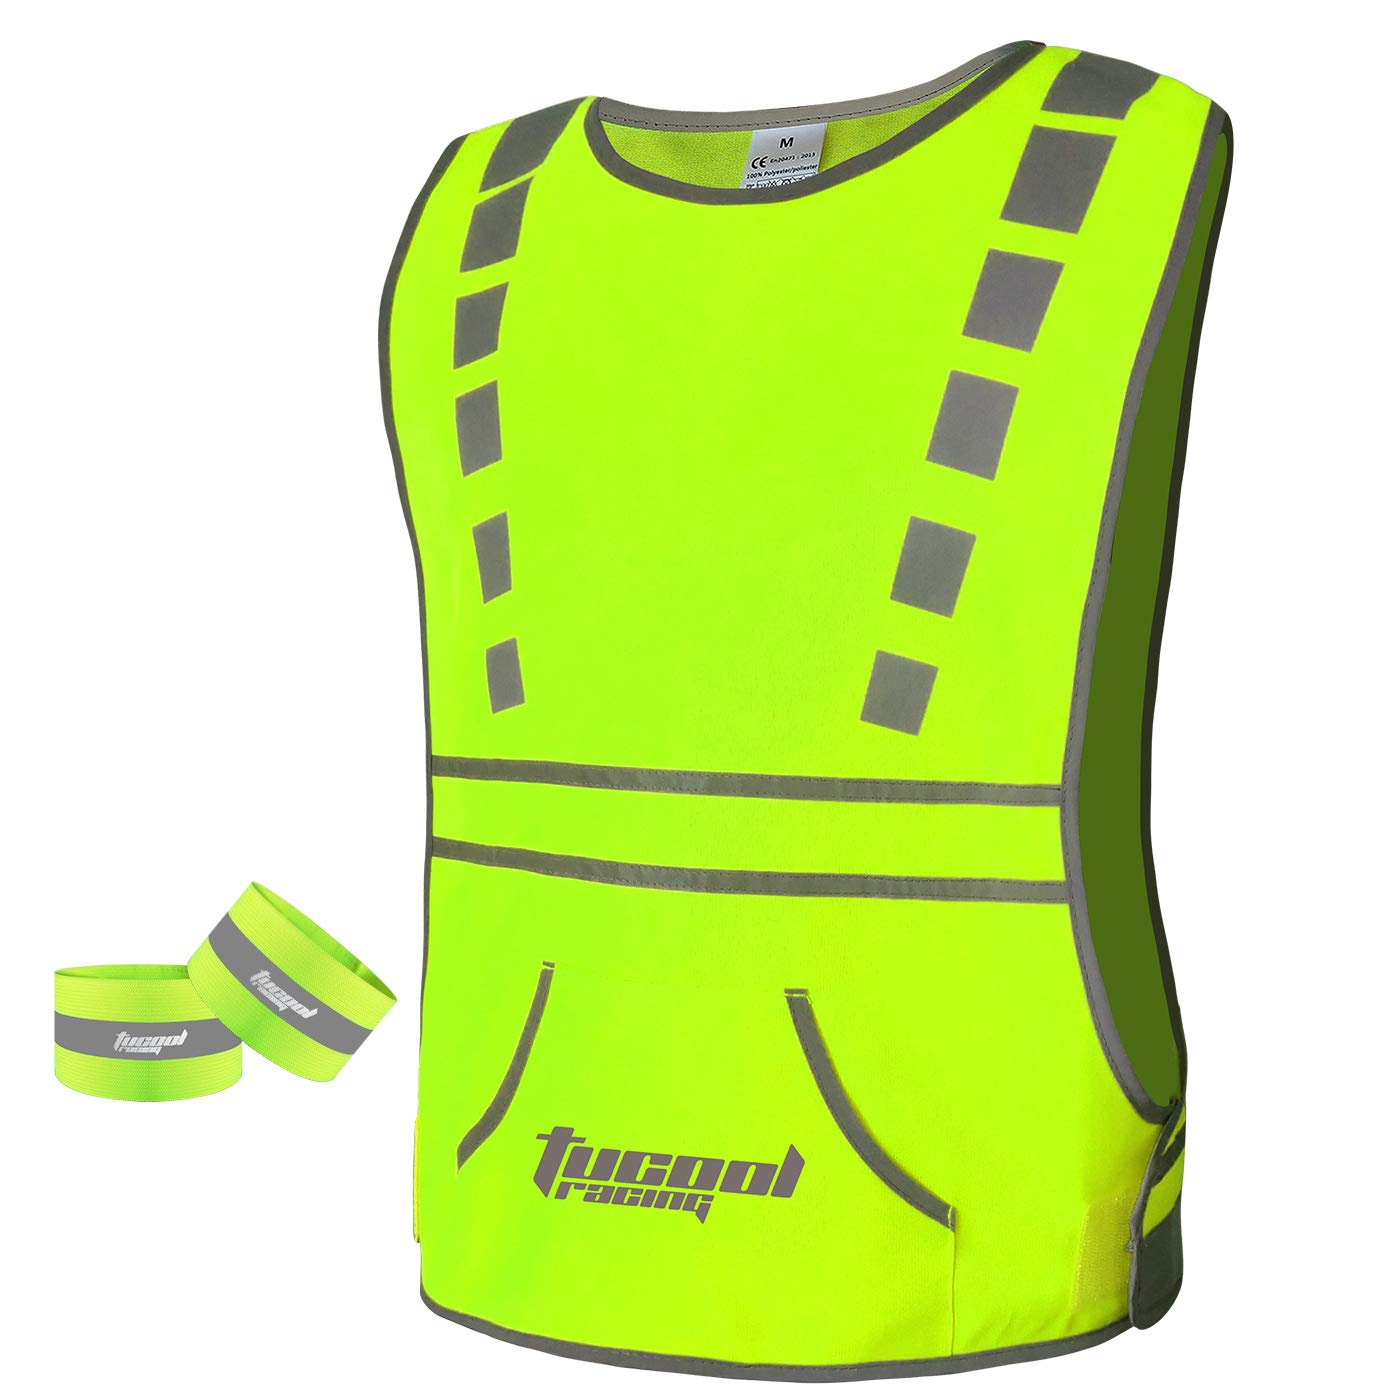 Tucoolracing Reflective Vest for Running and Cycling Motorcycling Jogging Dog Walk Vest with Pocket and 2 High Visibility Running Safety Bands (Green, M) von tucool racing